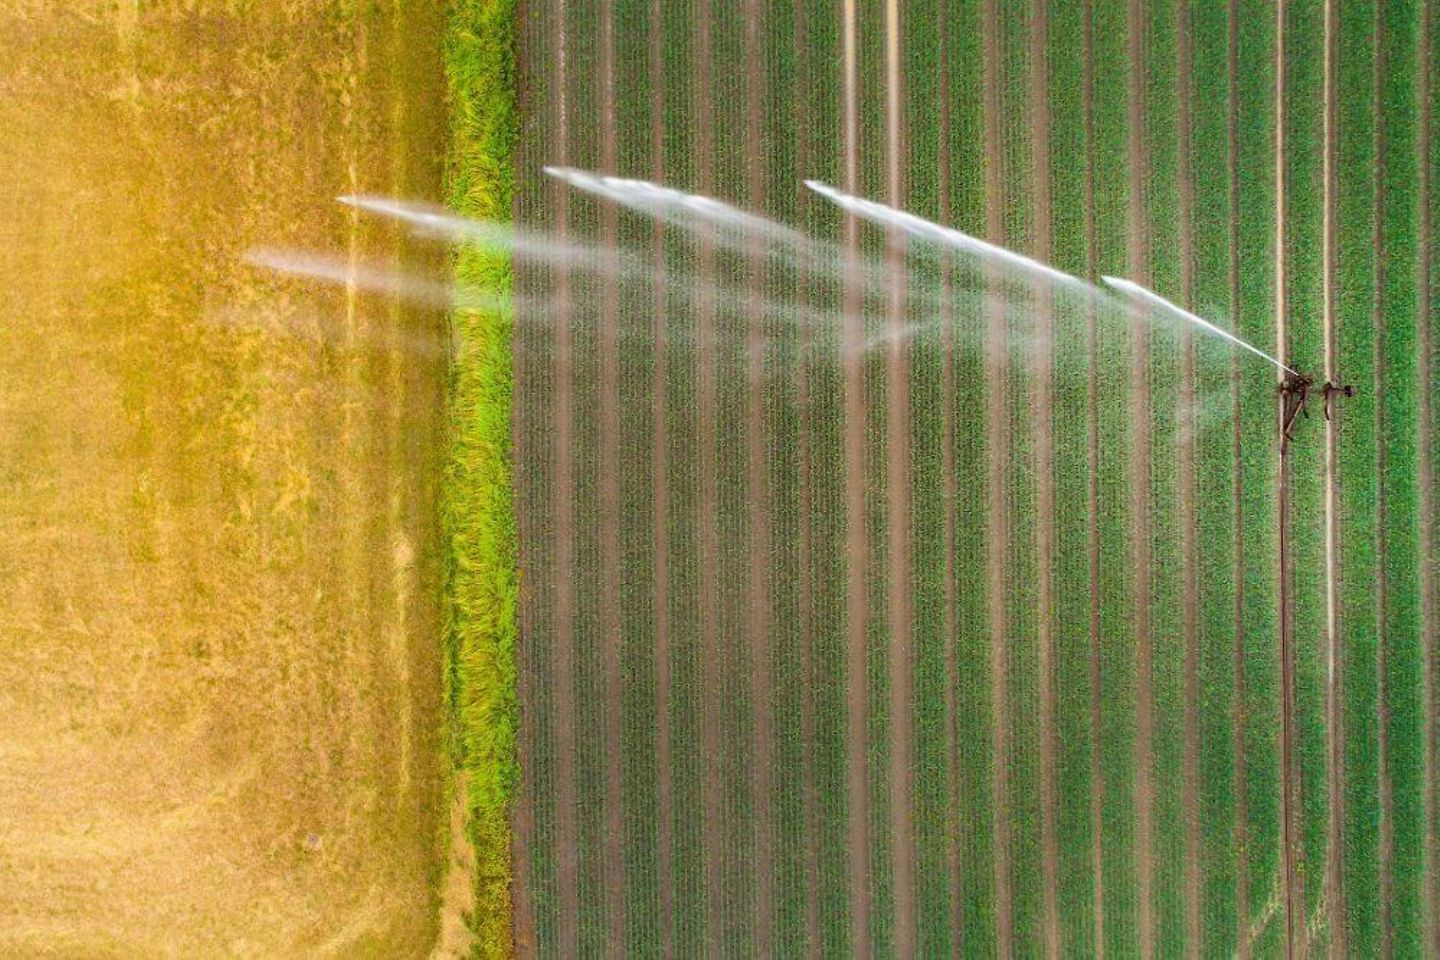 Watered farming with field sprinklers